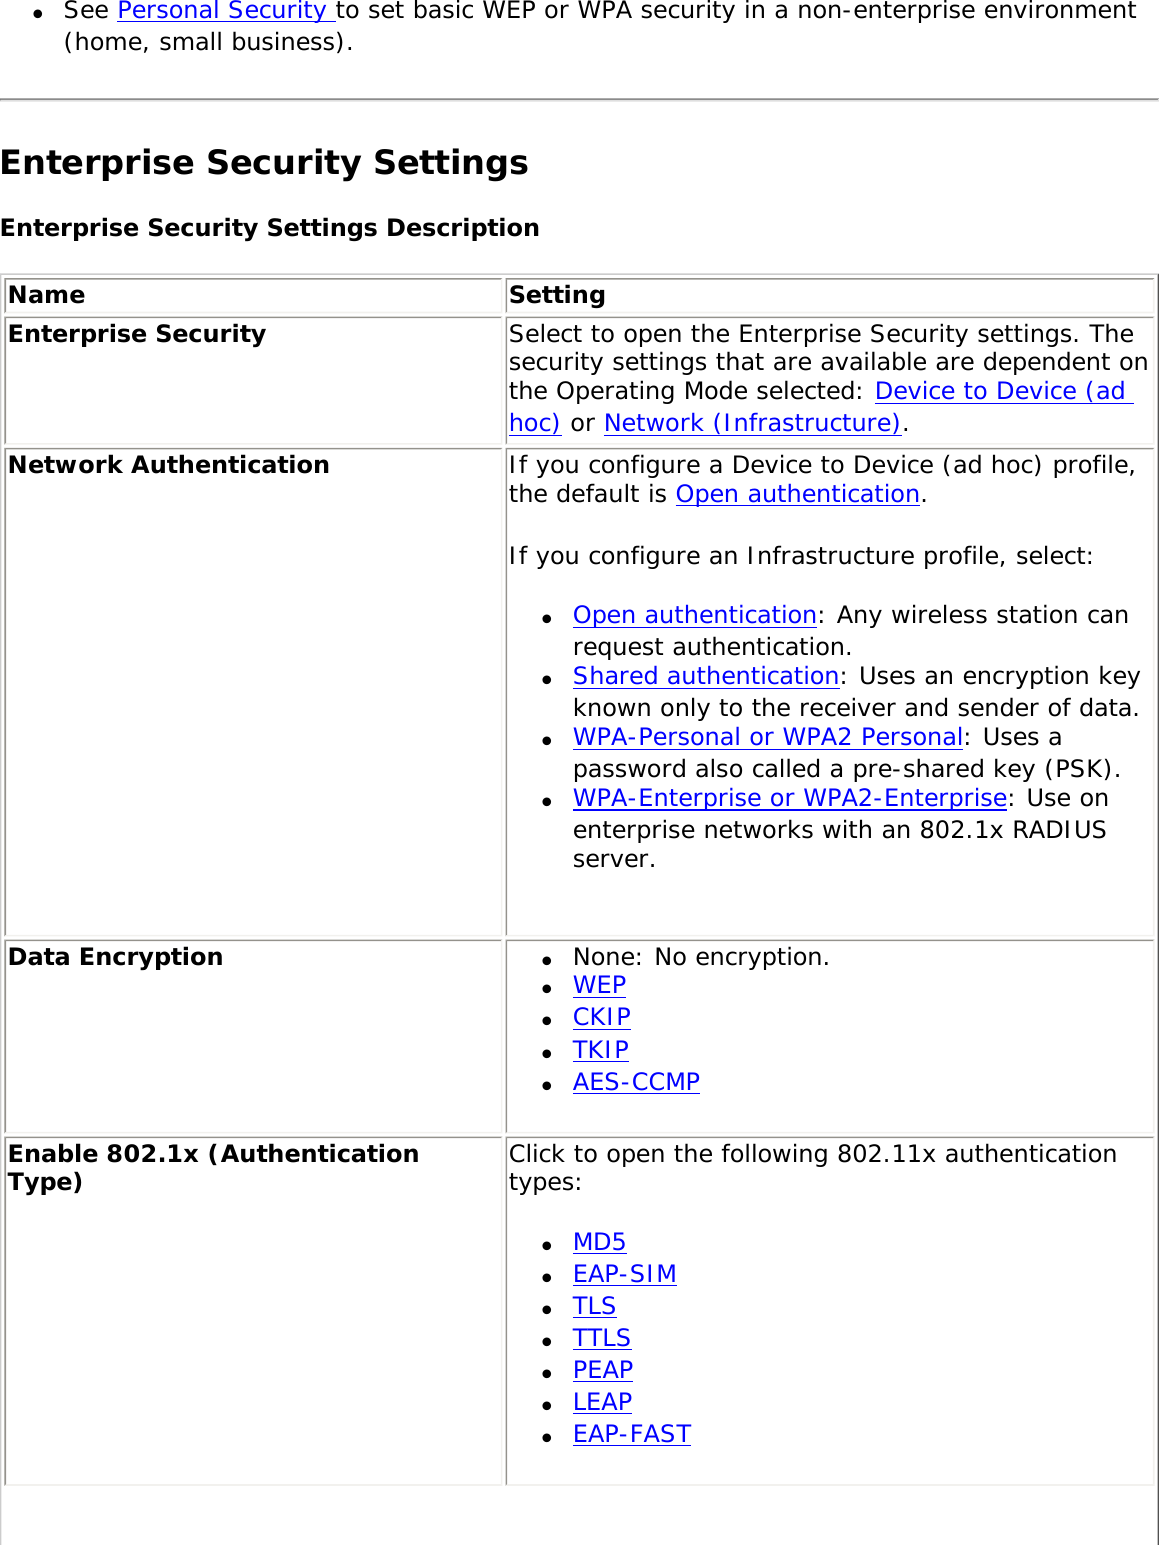 ●     See Personal Security to set basic WEP or WPA security in a non-enterprise environment (home, small business). Enterprise Security Settings Enterprise Security Settings Description Name SettingEnterprise Security  Select to open the Enterprise Security settings. The security settings that are available are dependent on the Operating Mode selected: Device to Device (ad hoc) or Network (Infrastructure). Network Authentication If you configure a Device to Device (ad hoc) profile, the default is Open authentication. If you configure an Infrastructure profile, select: ●     Open authentication: Any wireless station can request authentication.●     Shared authentication: Uses an encryption key known only to the receiver and sender of data.●     WPA-Personal or WPA2 Personal: Uses a password also called a pre-shared key (PSK).●     WPA-Enterprise or WPA2-Enterprise: Use on enterprise networks with an 802.1x RADIUS server.Data Encryption ●     None: No encryption. ●     WEP●     CKIP●     TKIP●     AES-CCMPEnable 802.1x (Authentication Type) Click to open the following 802.11x authentication types: ●     MD5●     EAP-SIM●     TLS ●     TTLS●     PEAP●     LEAP●     EAP-FAST